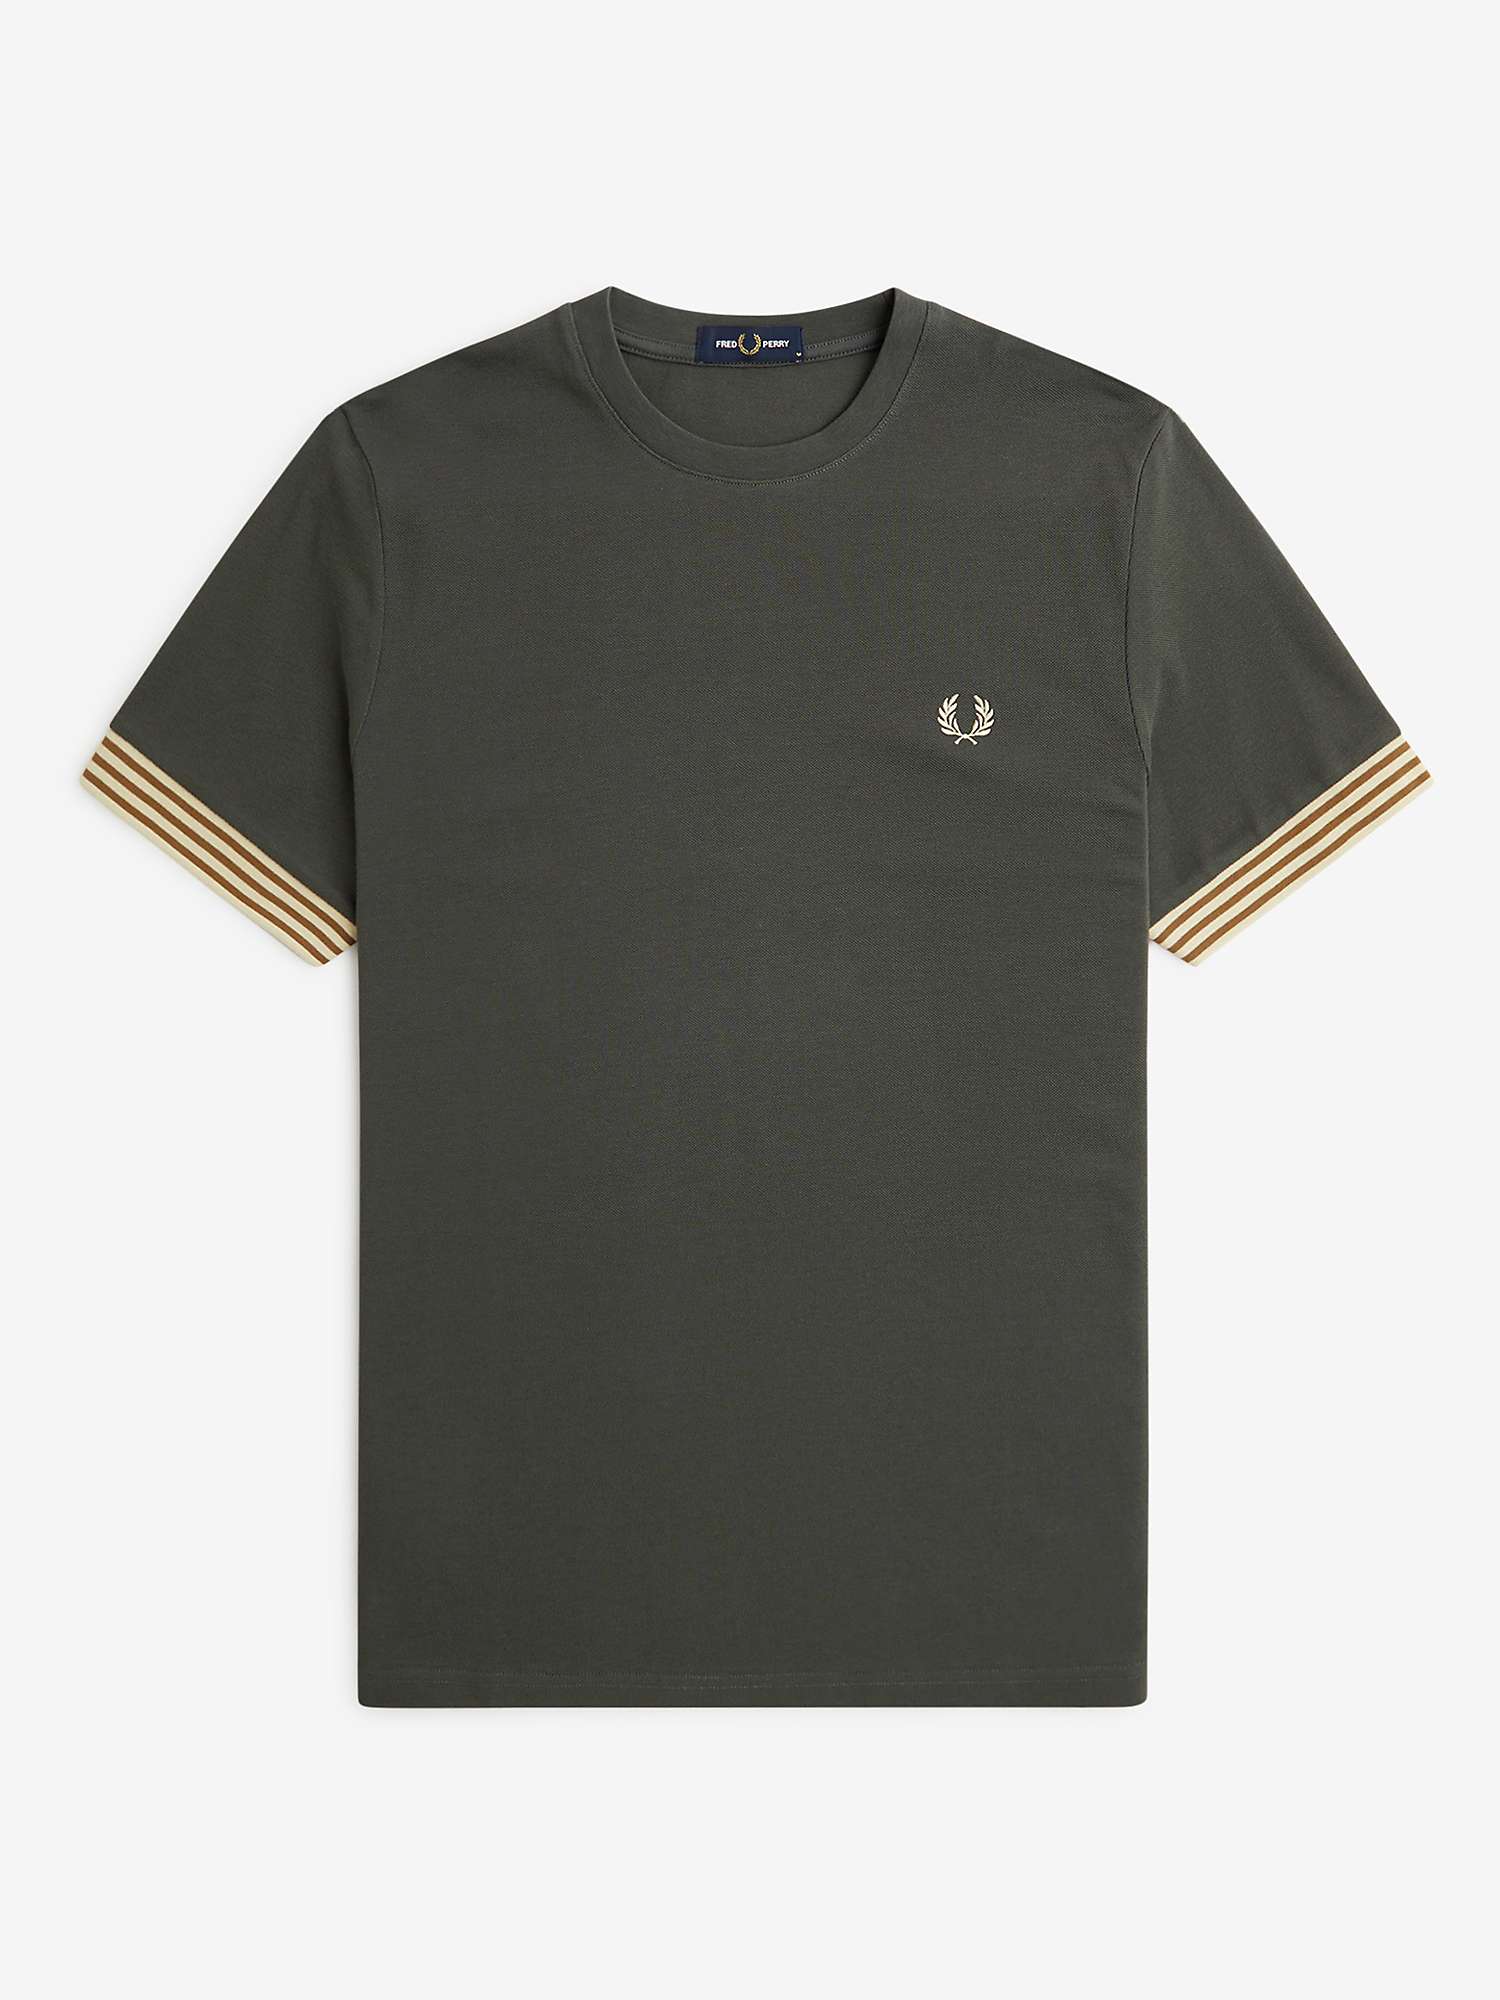 Buy Fred Perry Stripe Cuff T-Shirt, Green/Multi Online at johnlewis.com